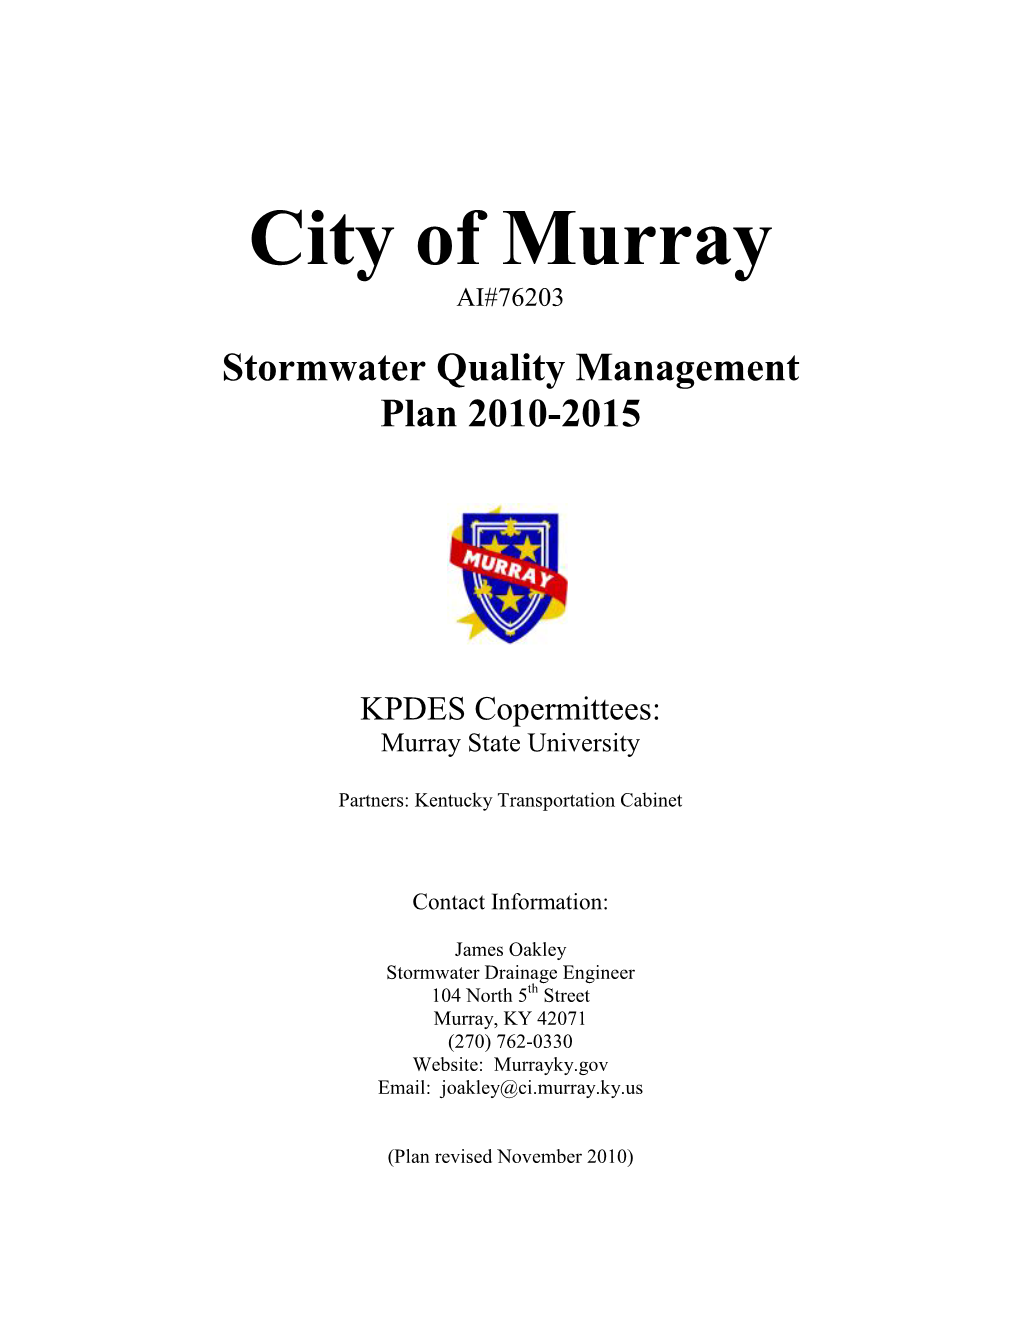 Stormwater Quality Management Plan 2010-2015